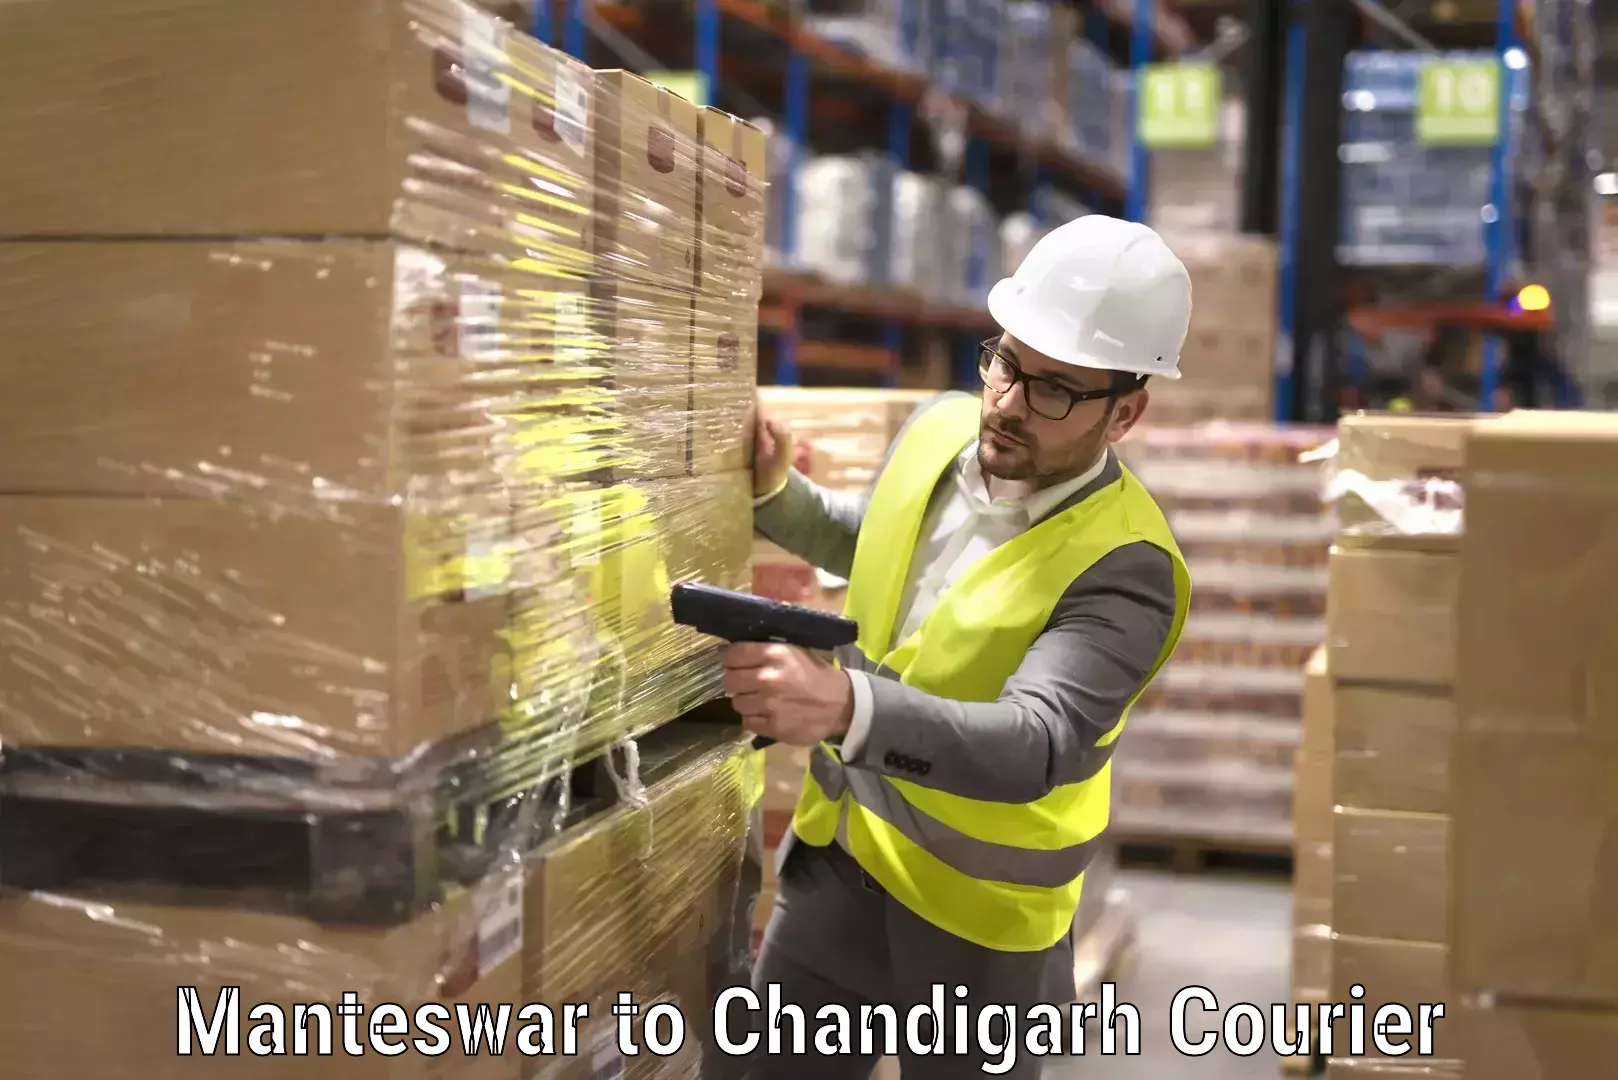 Quality moving and storage Manteswar to Chandigarh